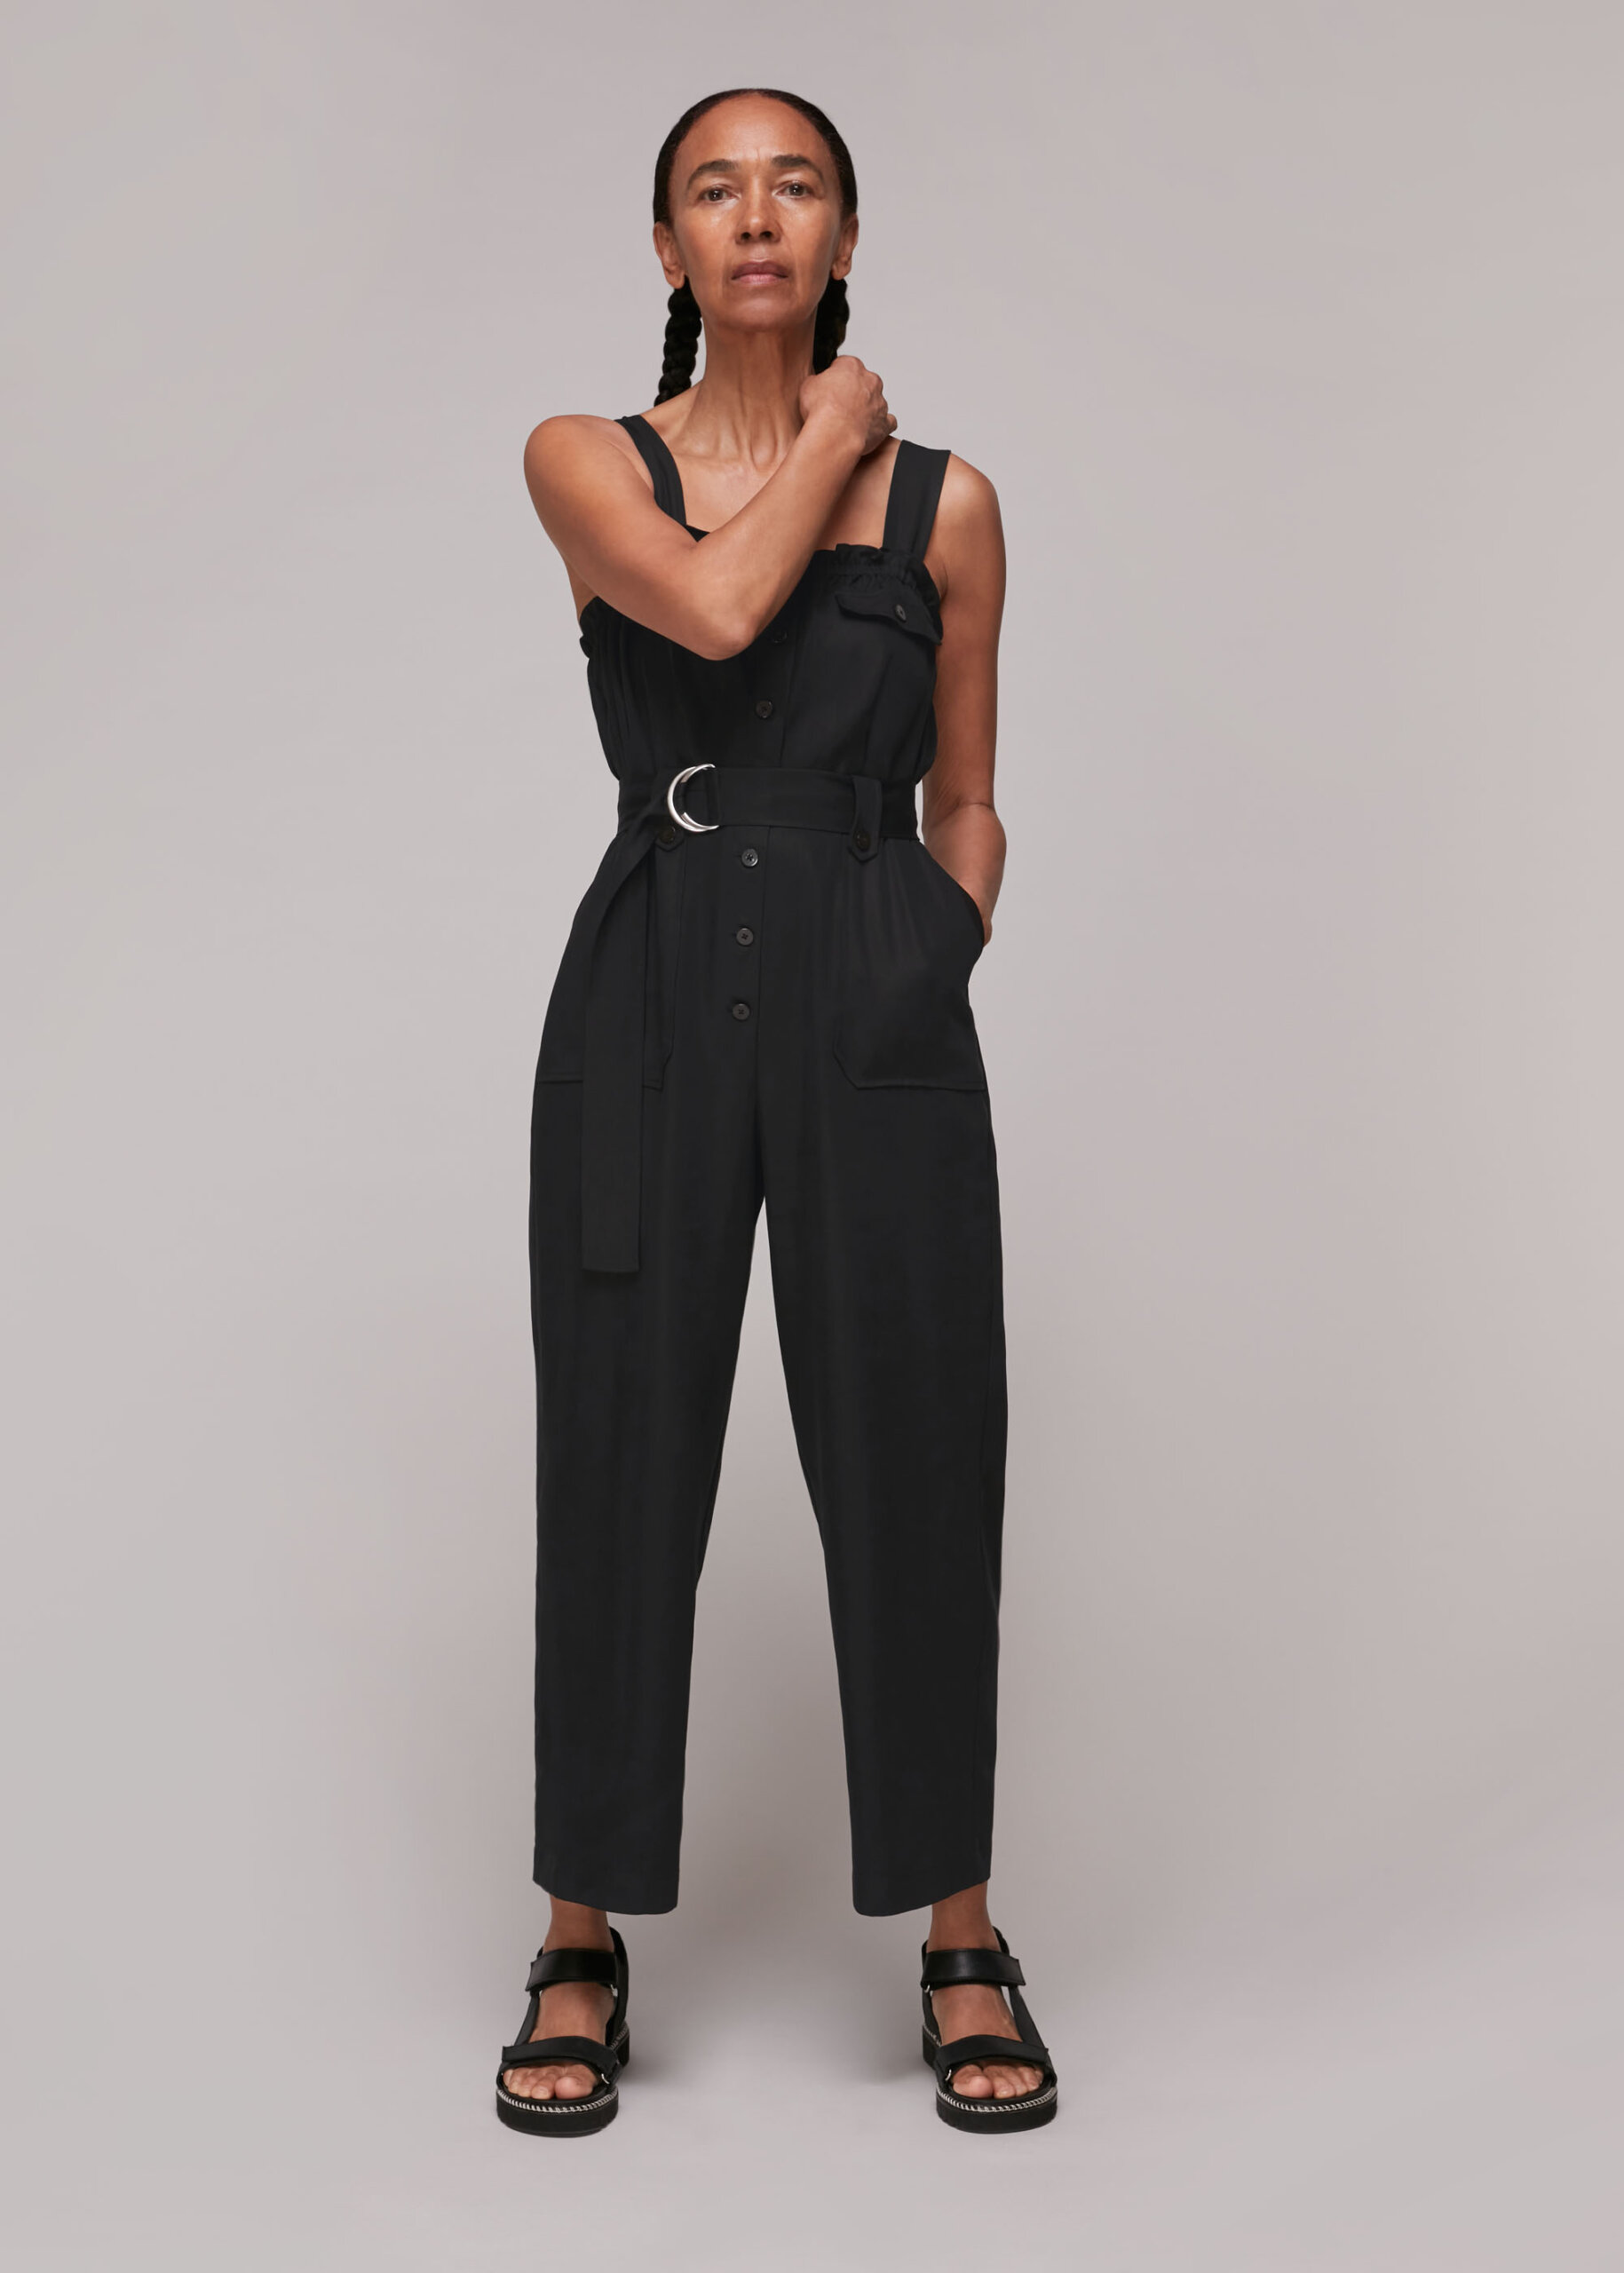 Whistles Women's Frill Utility Belted Jumpsuit